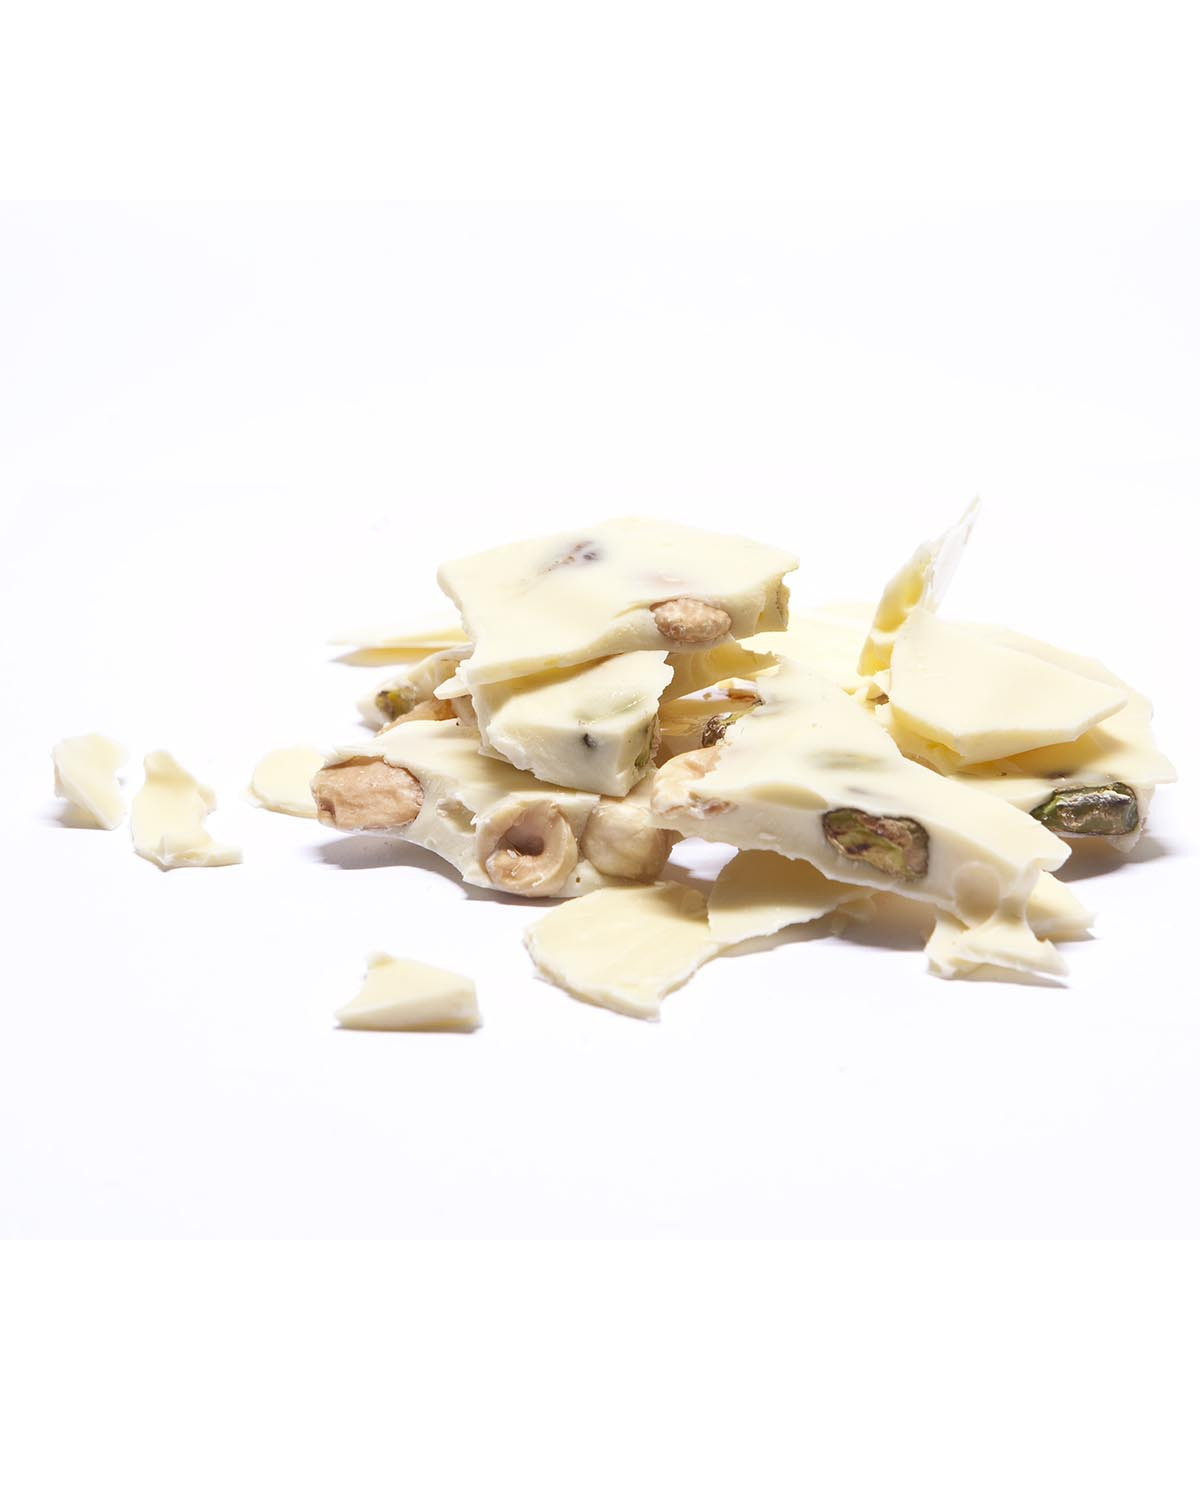 White chocolate slabs with nuts